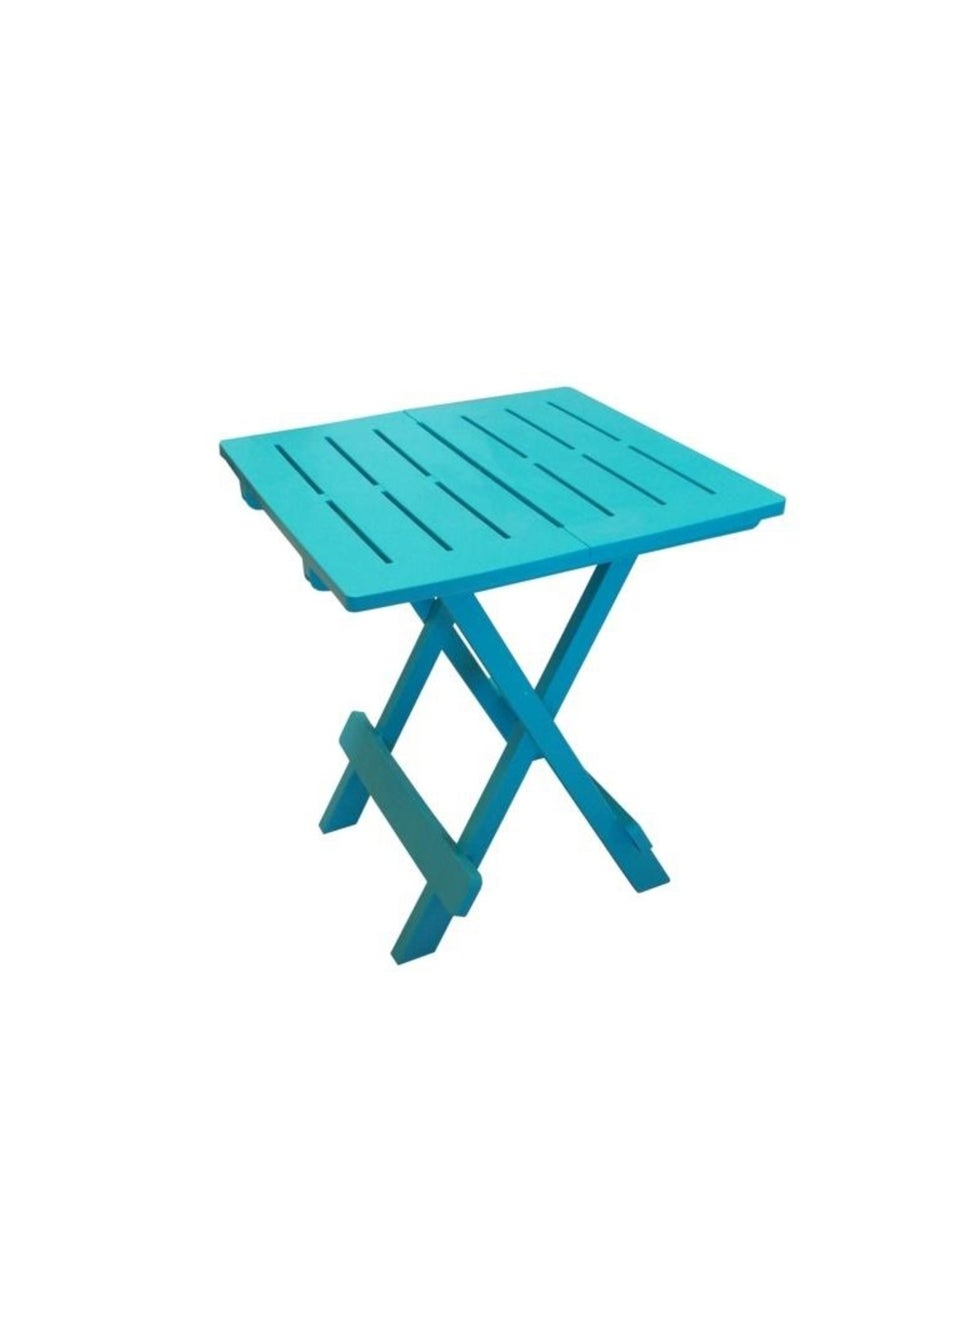 SupaGarden Turquoise Folding Plastic Camping Table